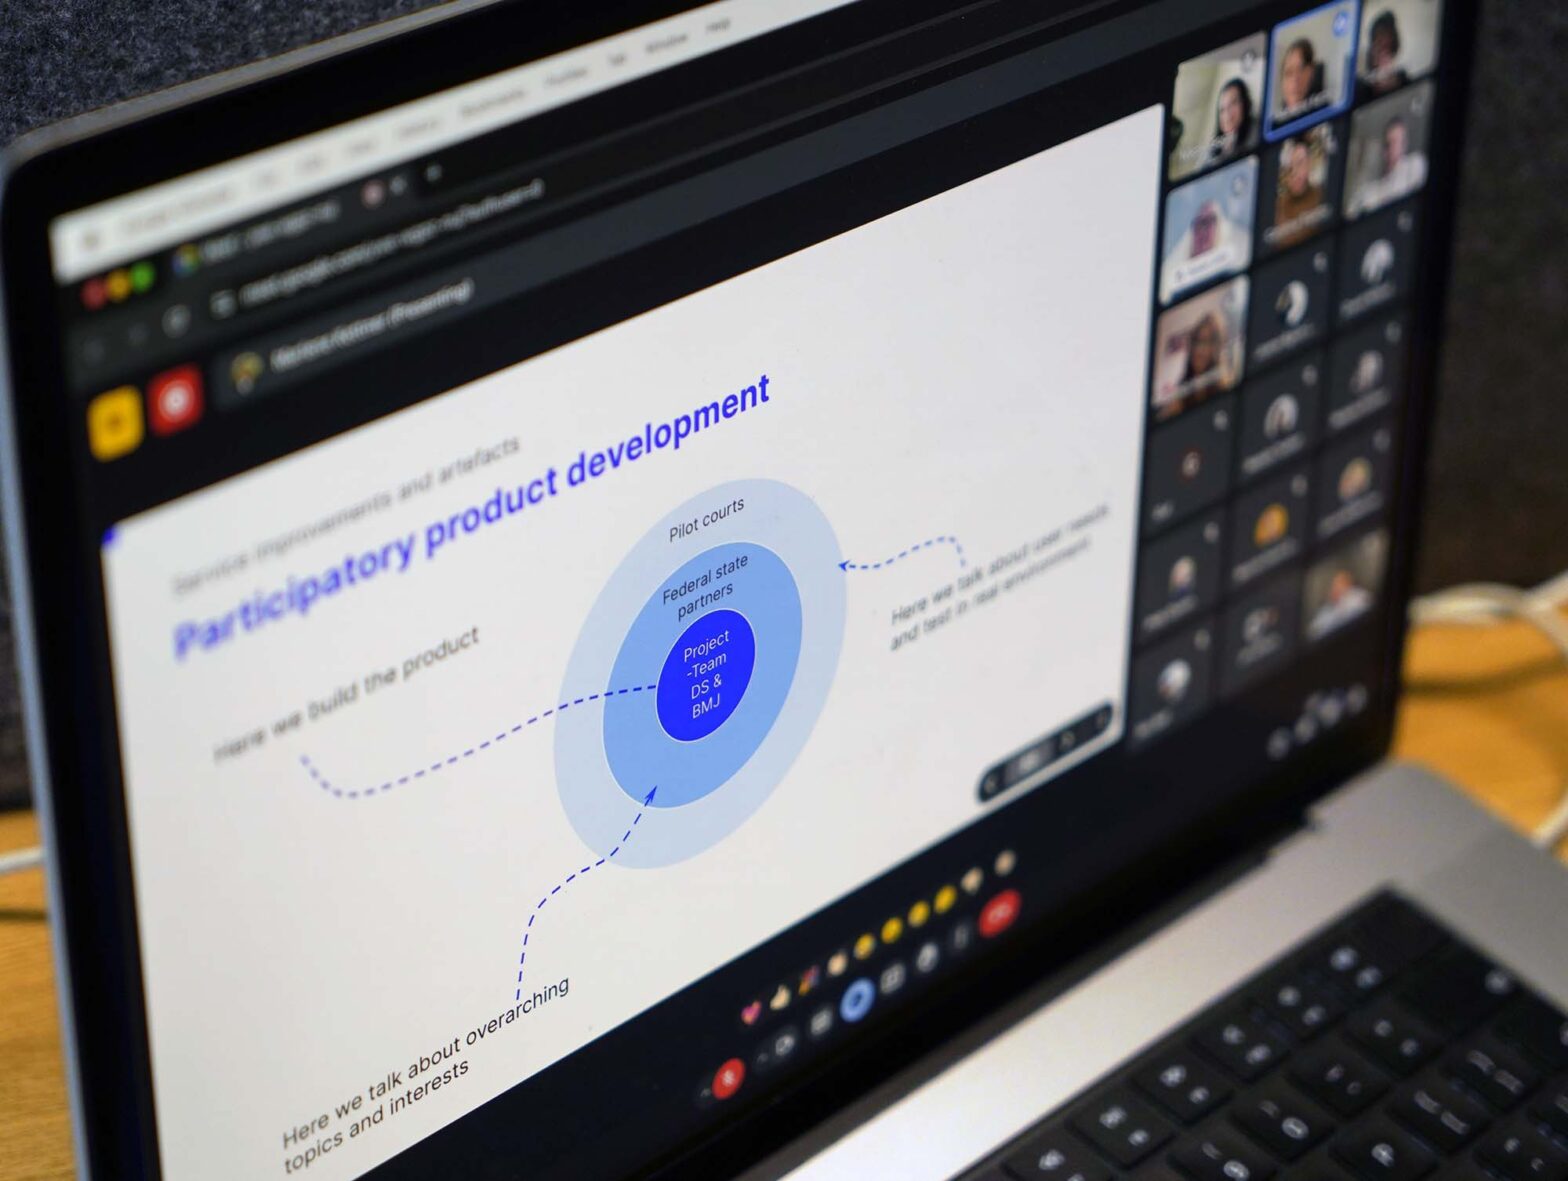 A laptop computer showing a diagram with various circles inside each other titled ‘Participatory product development’ with various peoples’ faces next to it